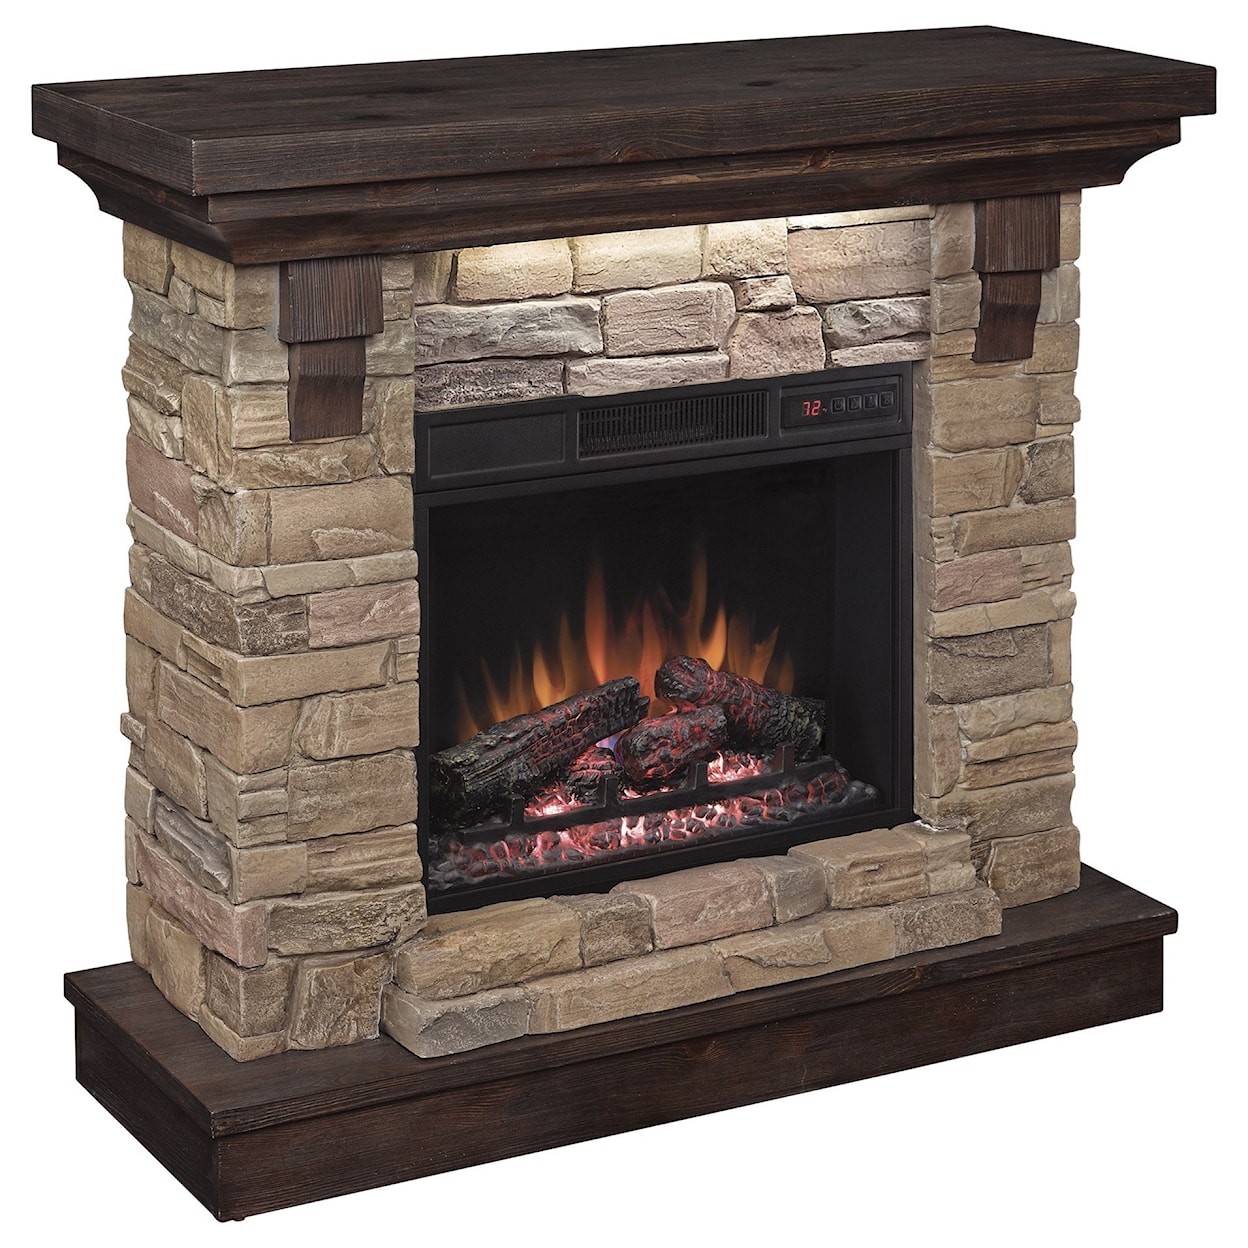 ClassicFlame Eugene 23" Wall Mantel Fireplace